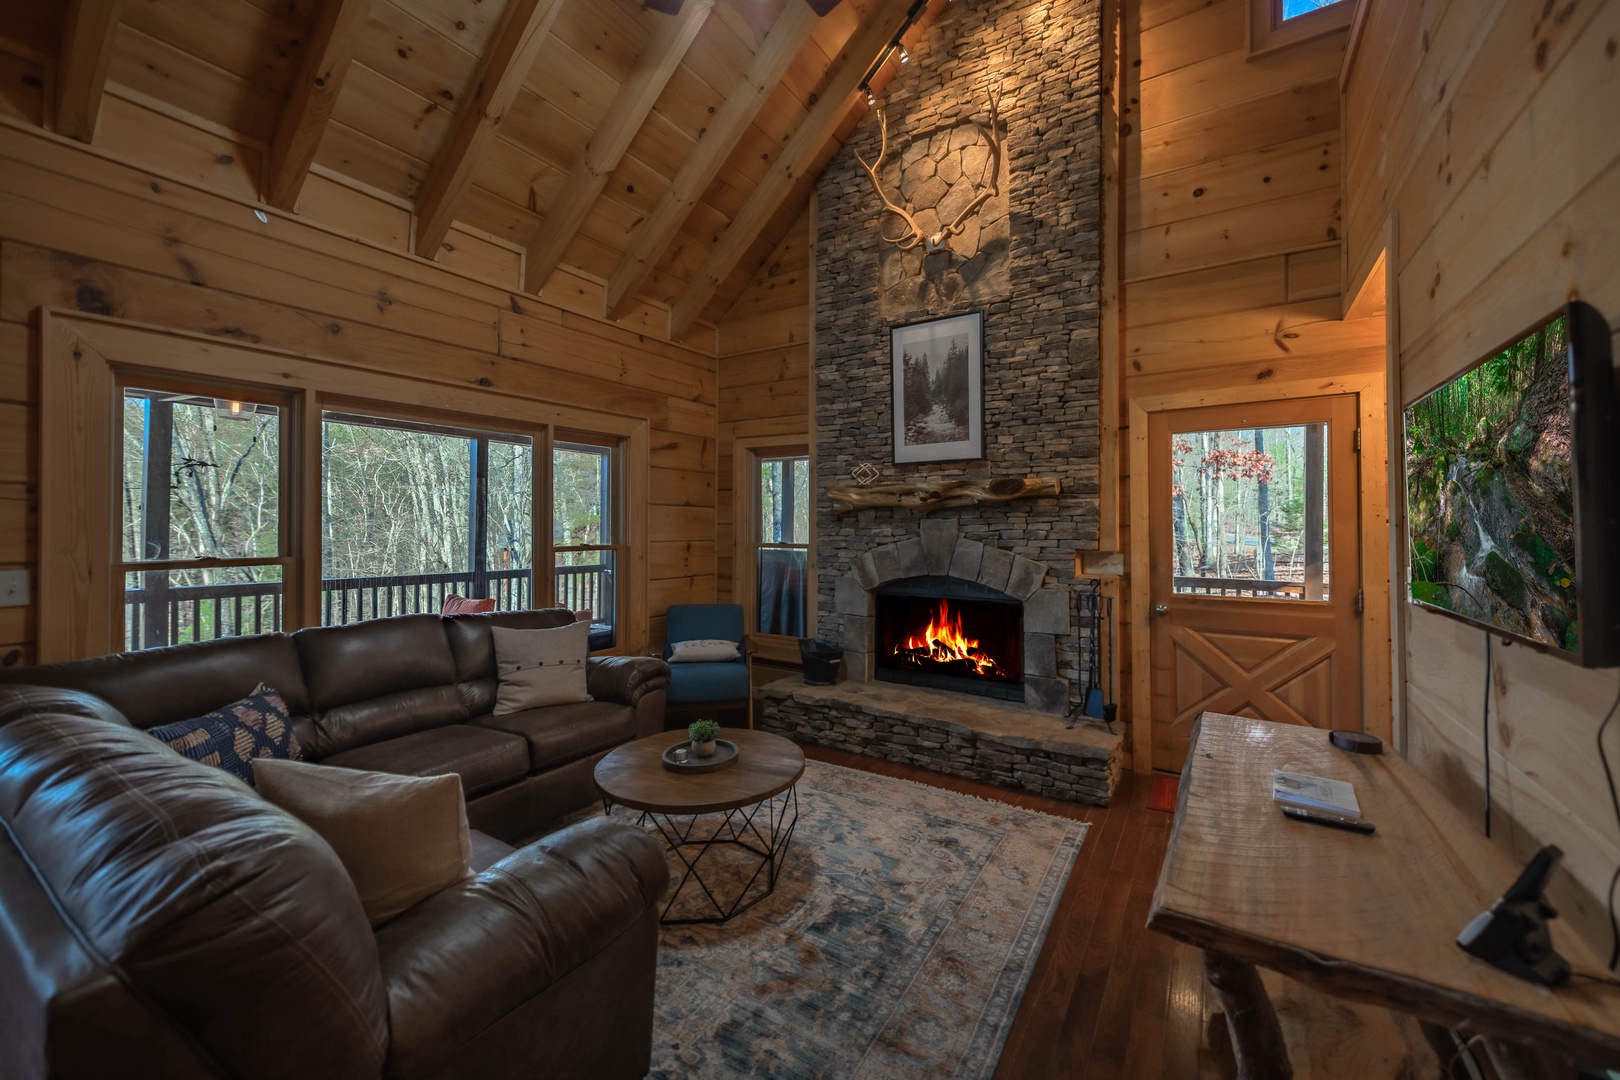 Misty Mountain Escape - Living Room with Wood-Burning Fireplace